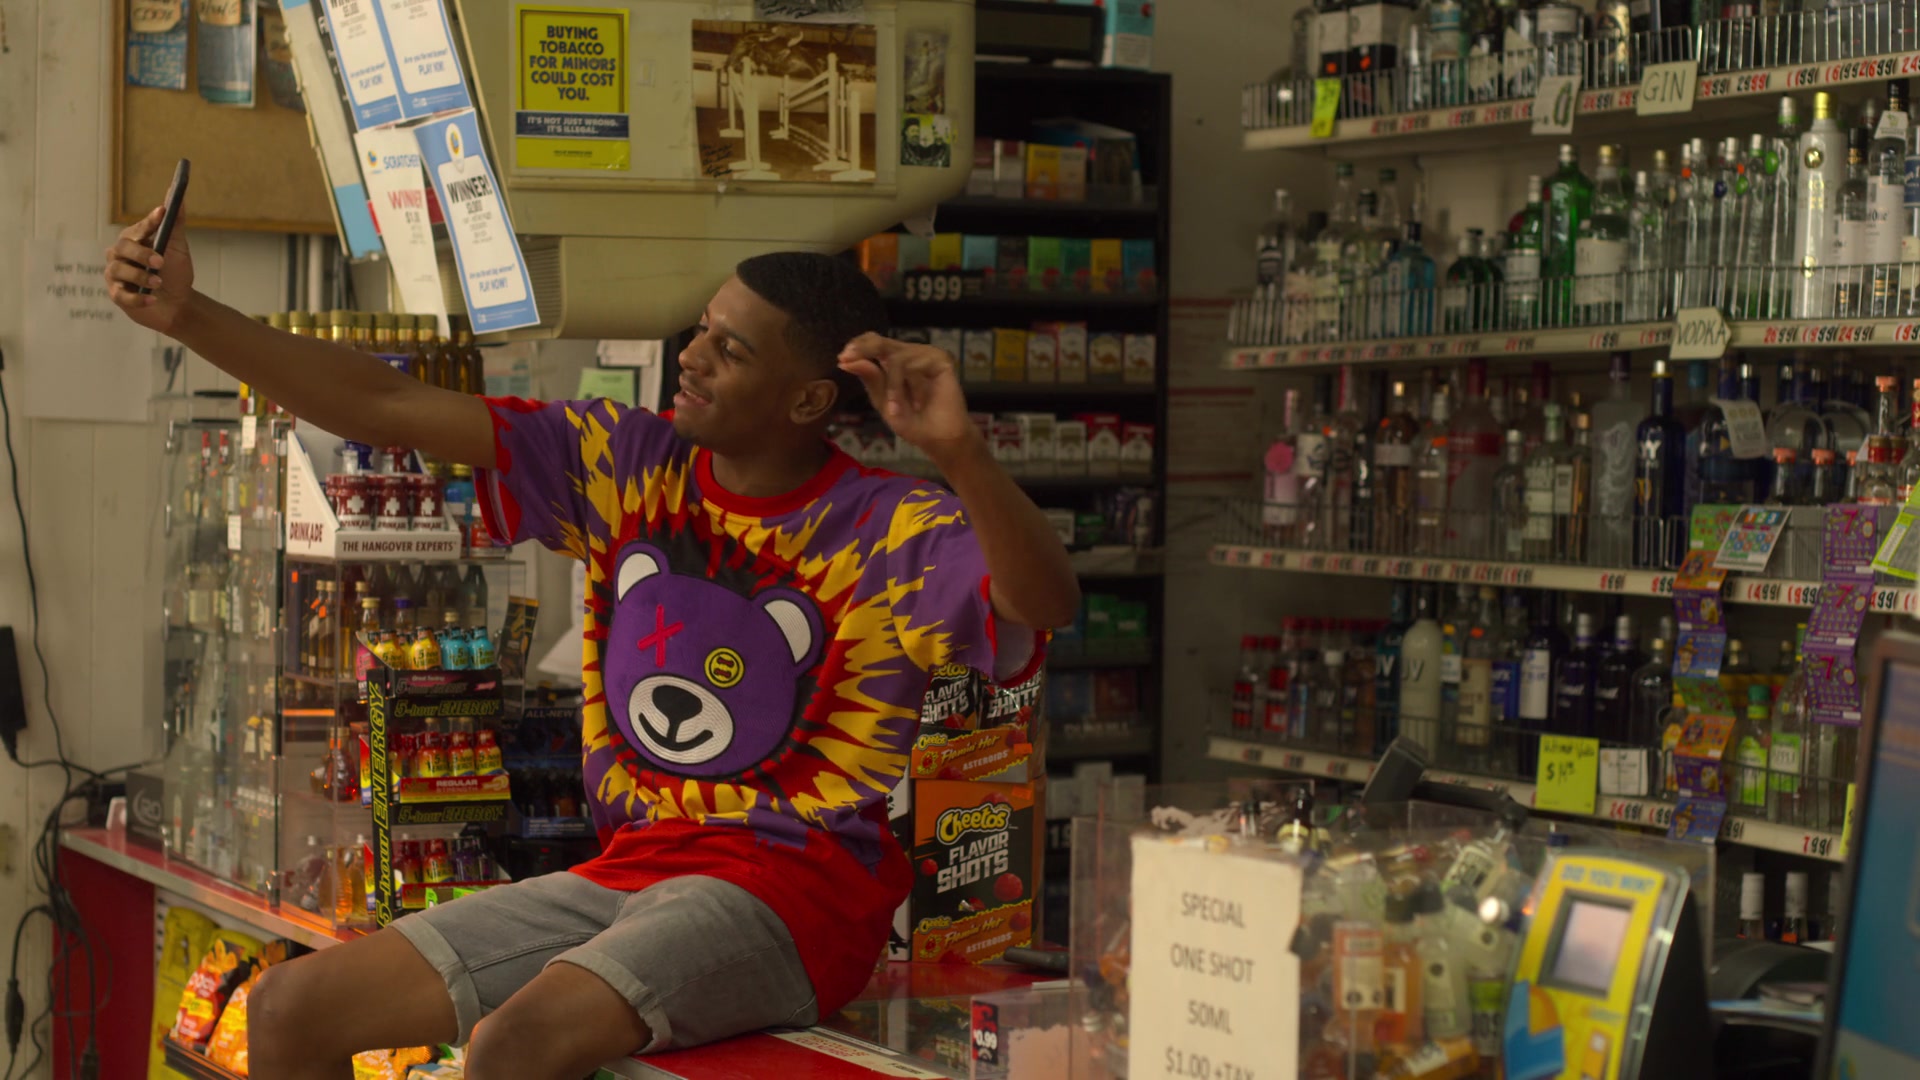 Cheetos Flavor Shots In On My Block S03E07 (2020)